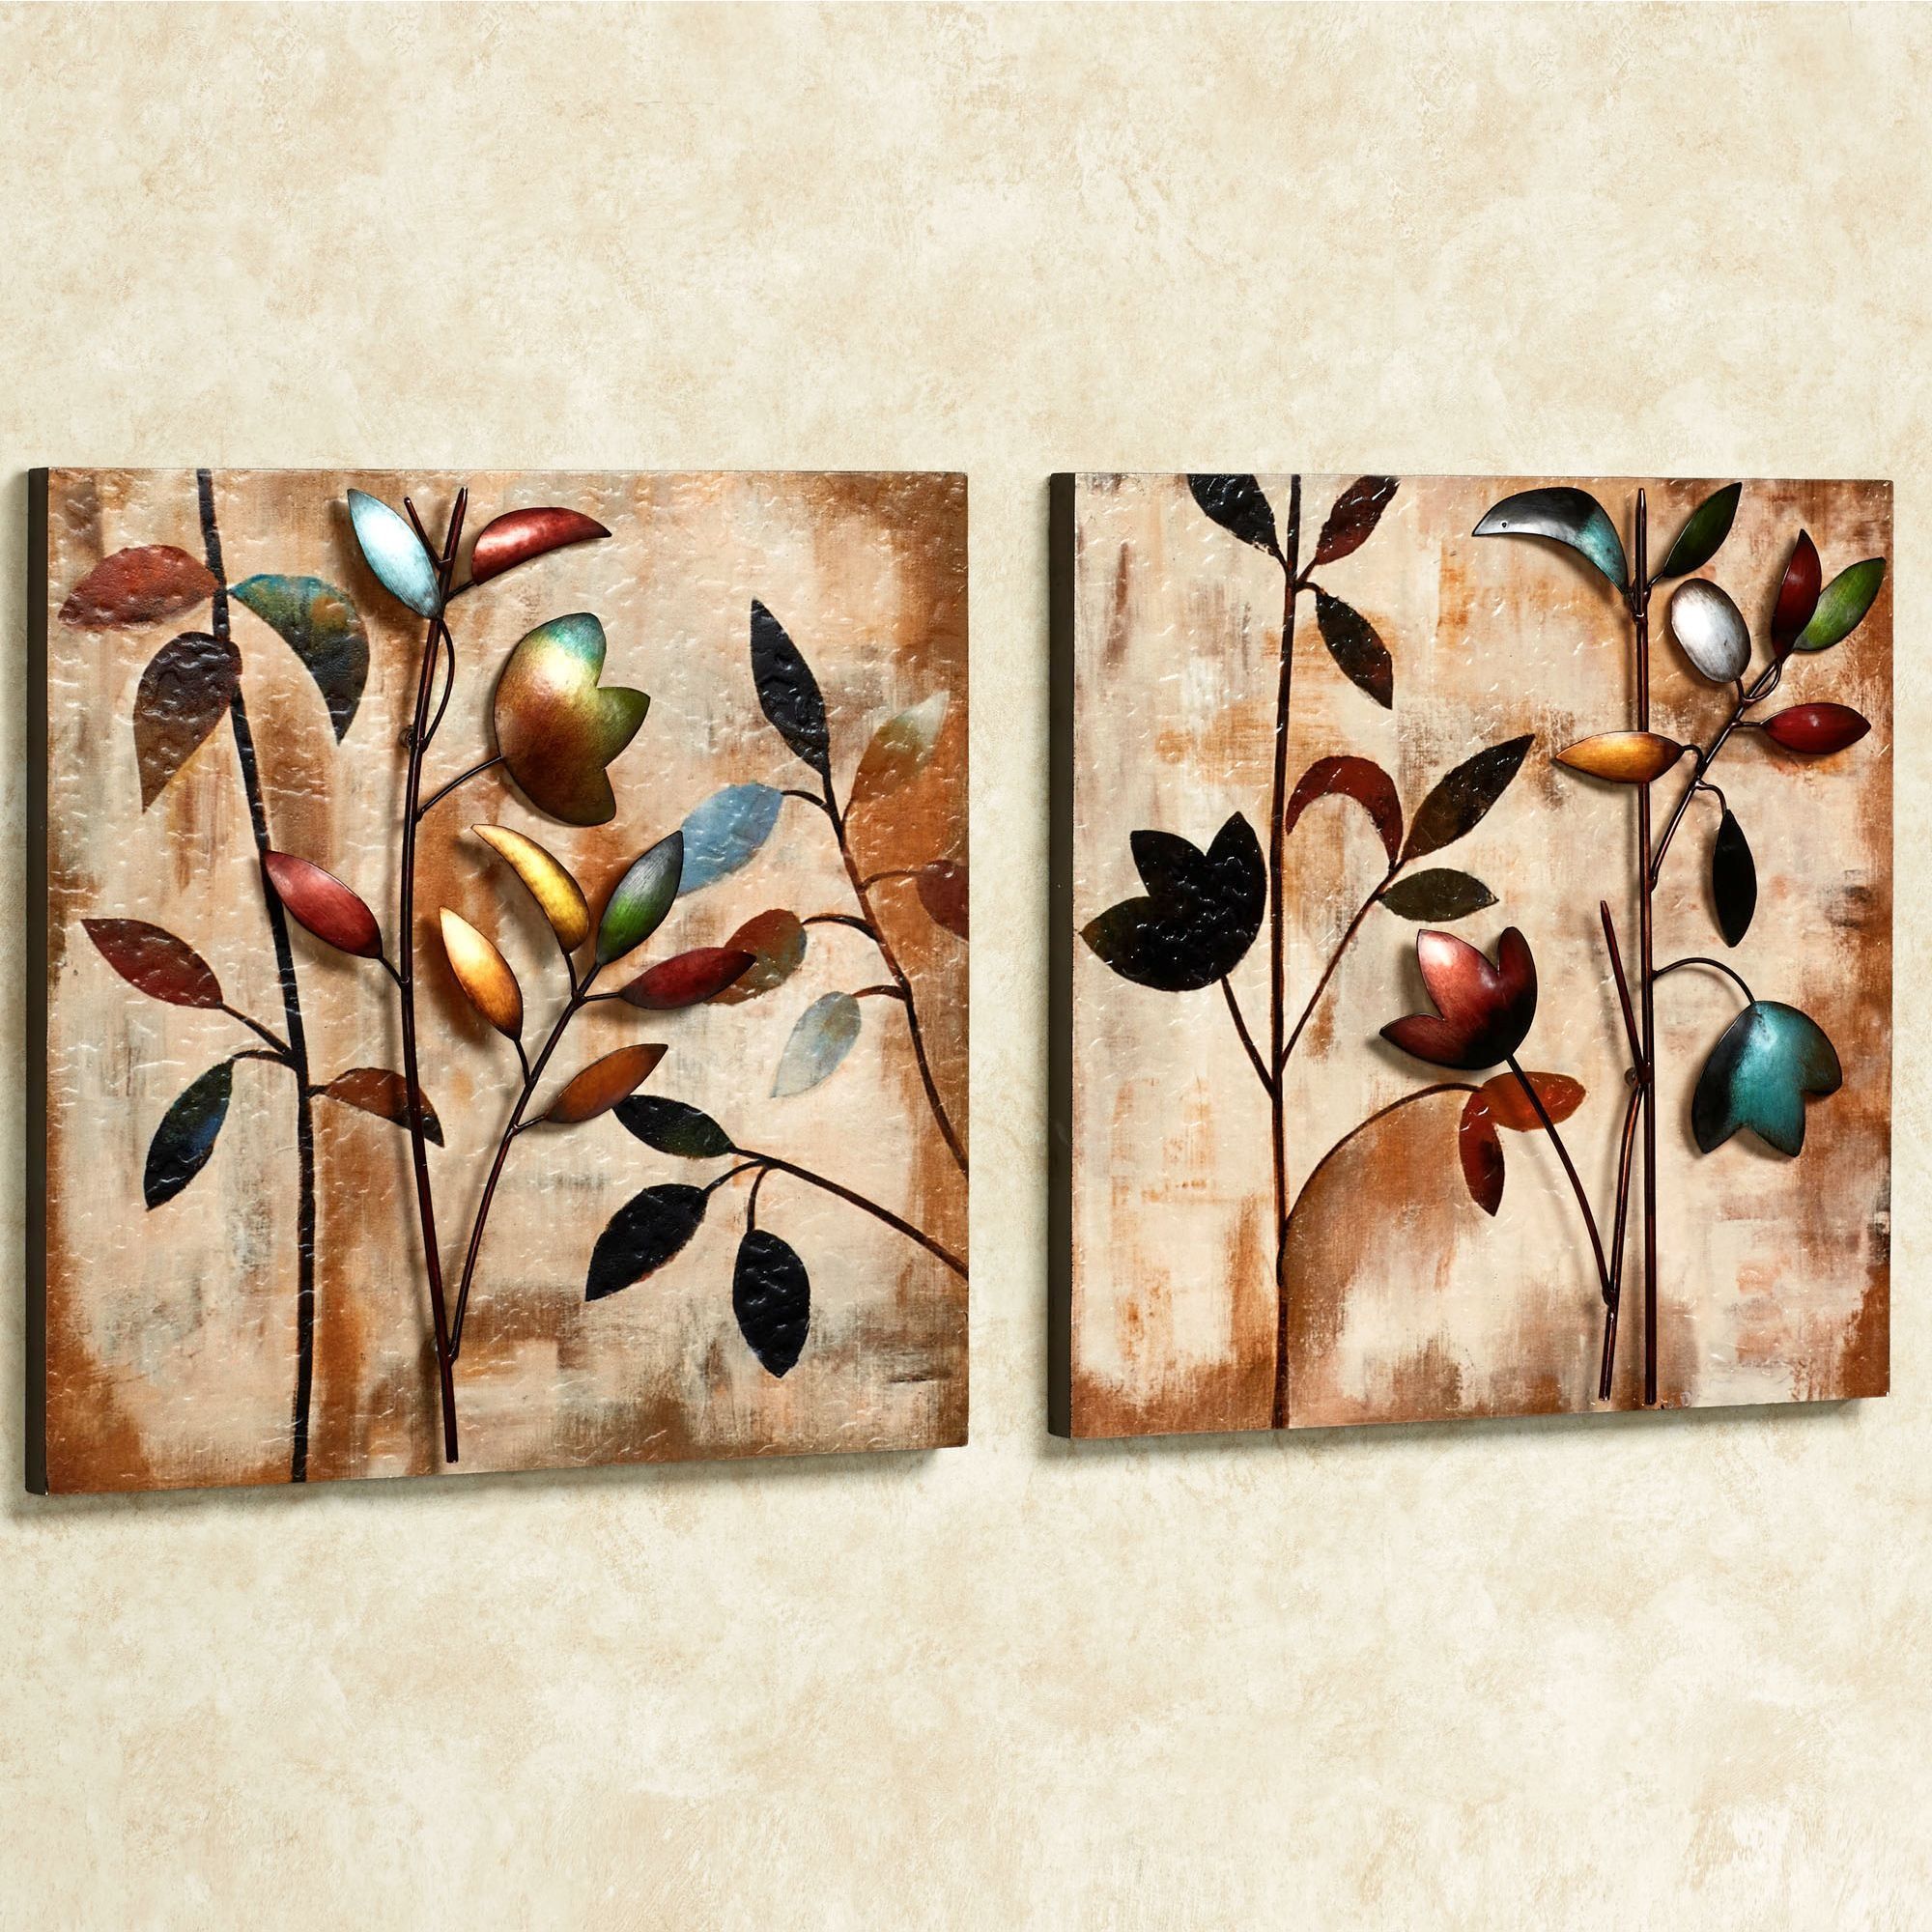 Watercolor Forest Dimensional Wall Art Set Intended For Current Dimensional Wall Art (View 9 of 20)